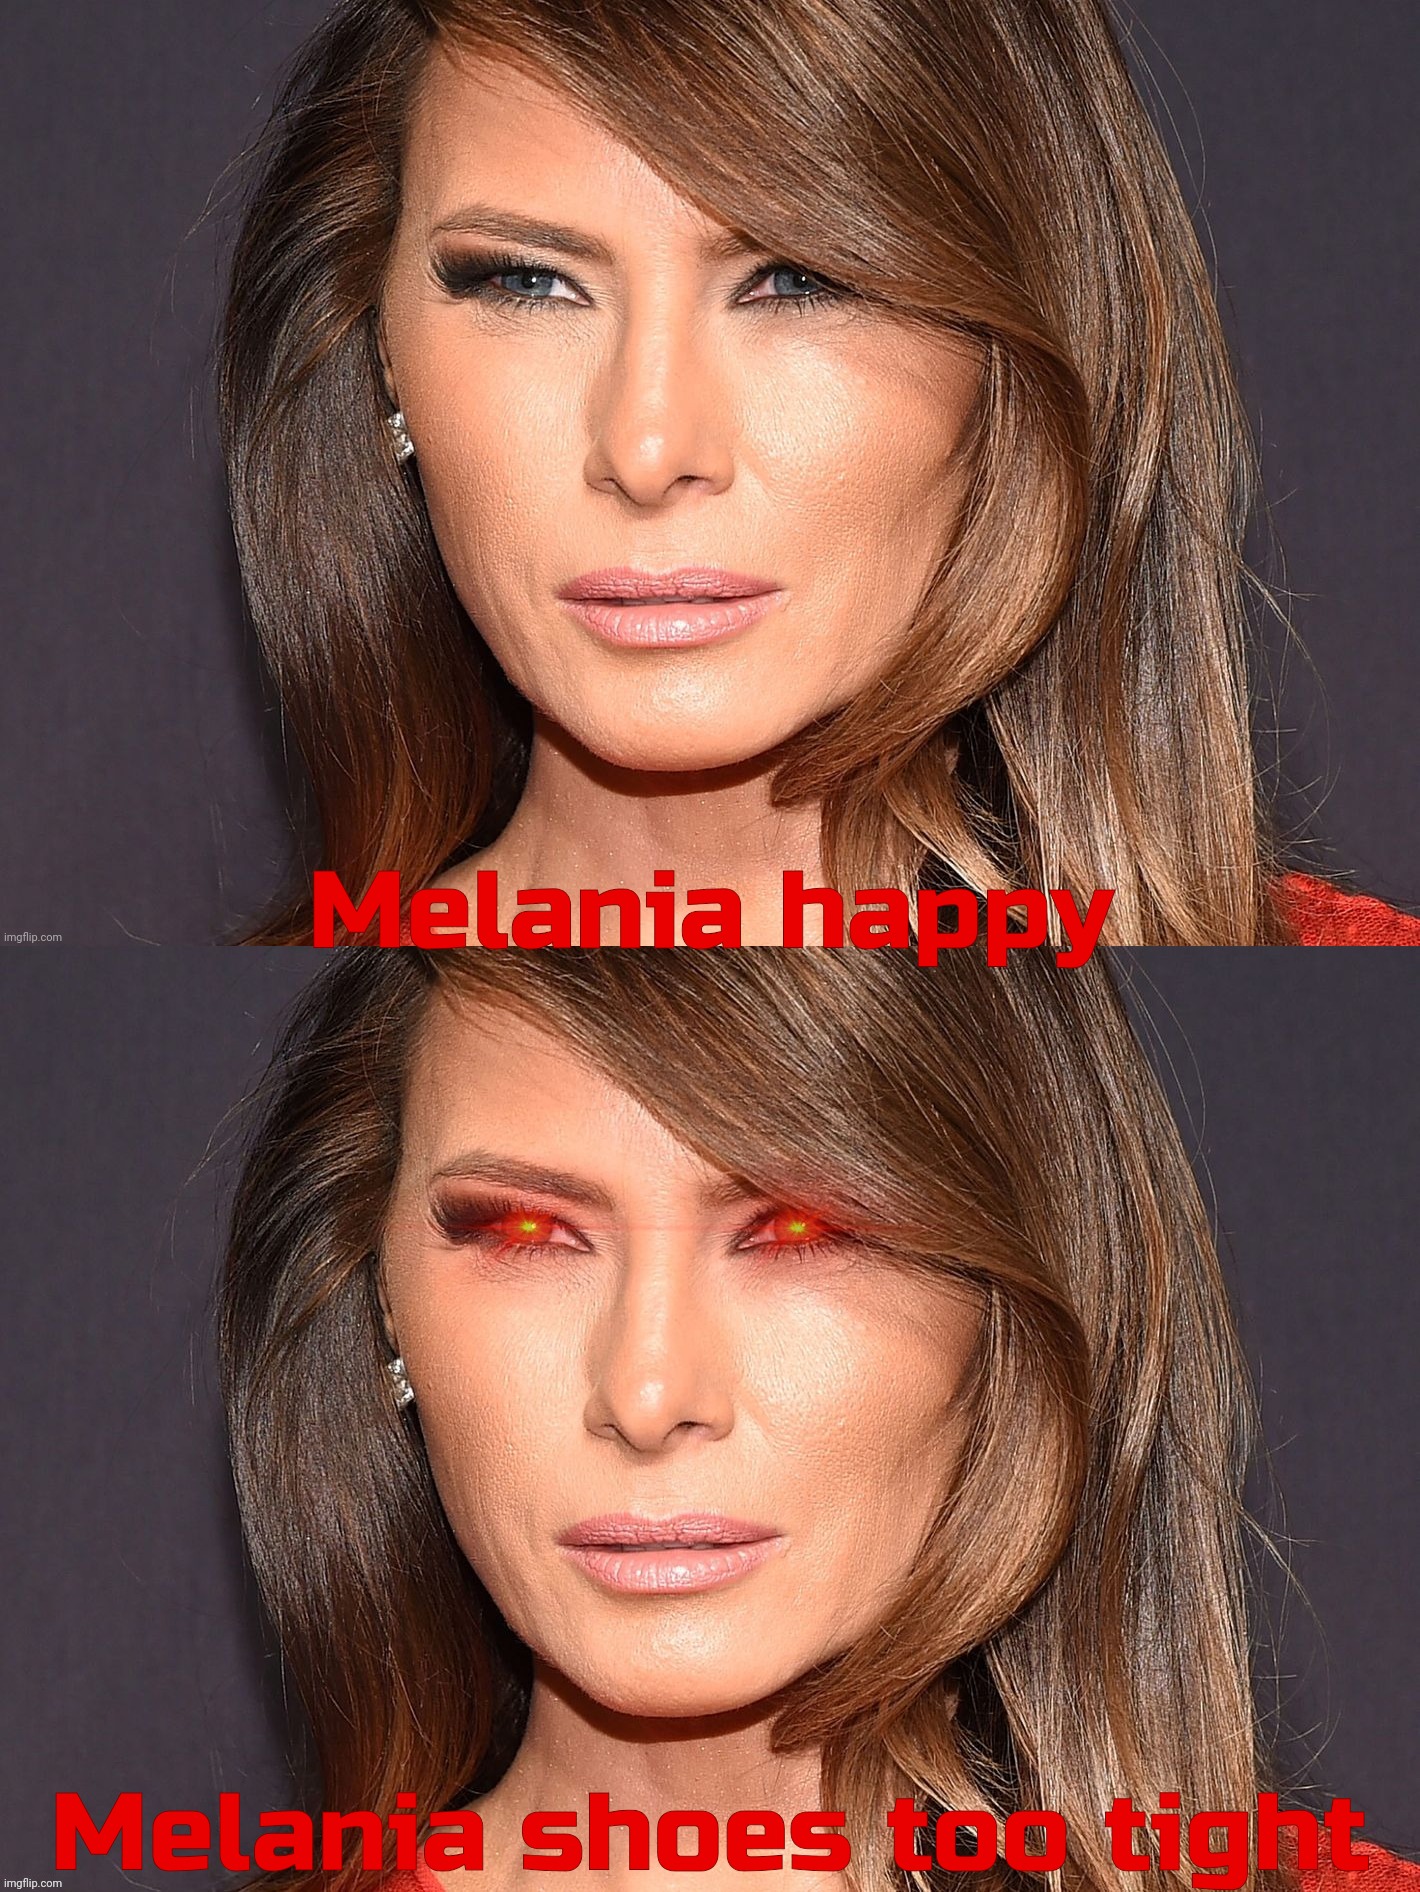 Melania Trump, when one expression will have to do. | Melania happy; Melania shoes too tight | image tagged in melania trump,trump,botox,one face,one expression,frozen | made w/ Imgflip meme maker